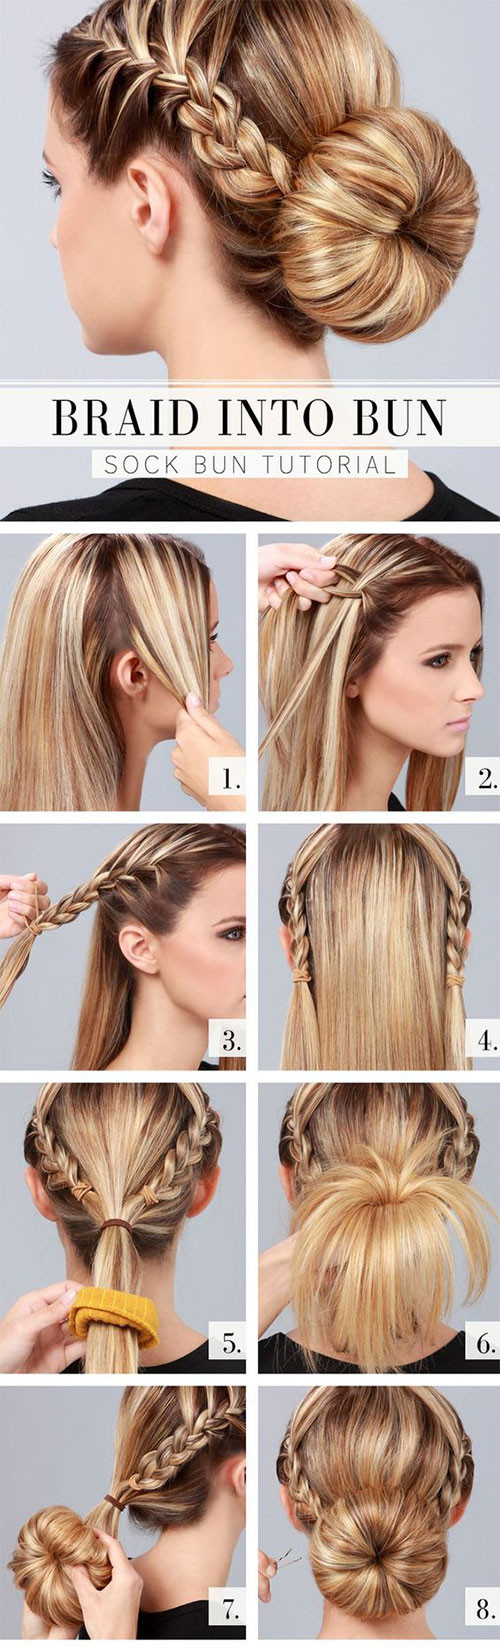 Hairstyle Easy Step By Step
 12 Easy Step By Step Summer Hairstyle Tutorials For